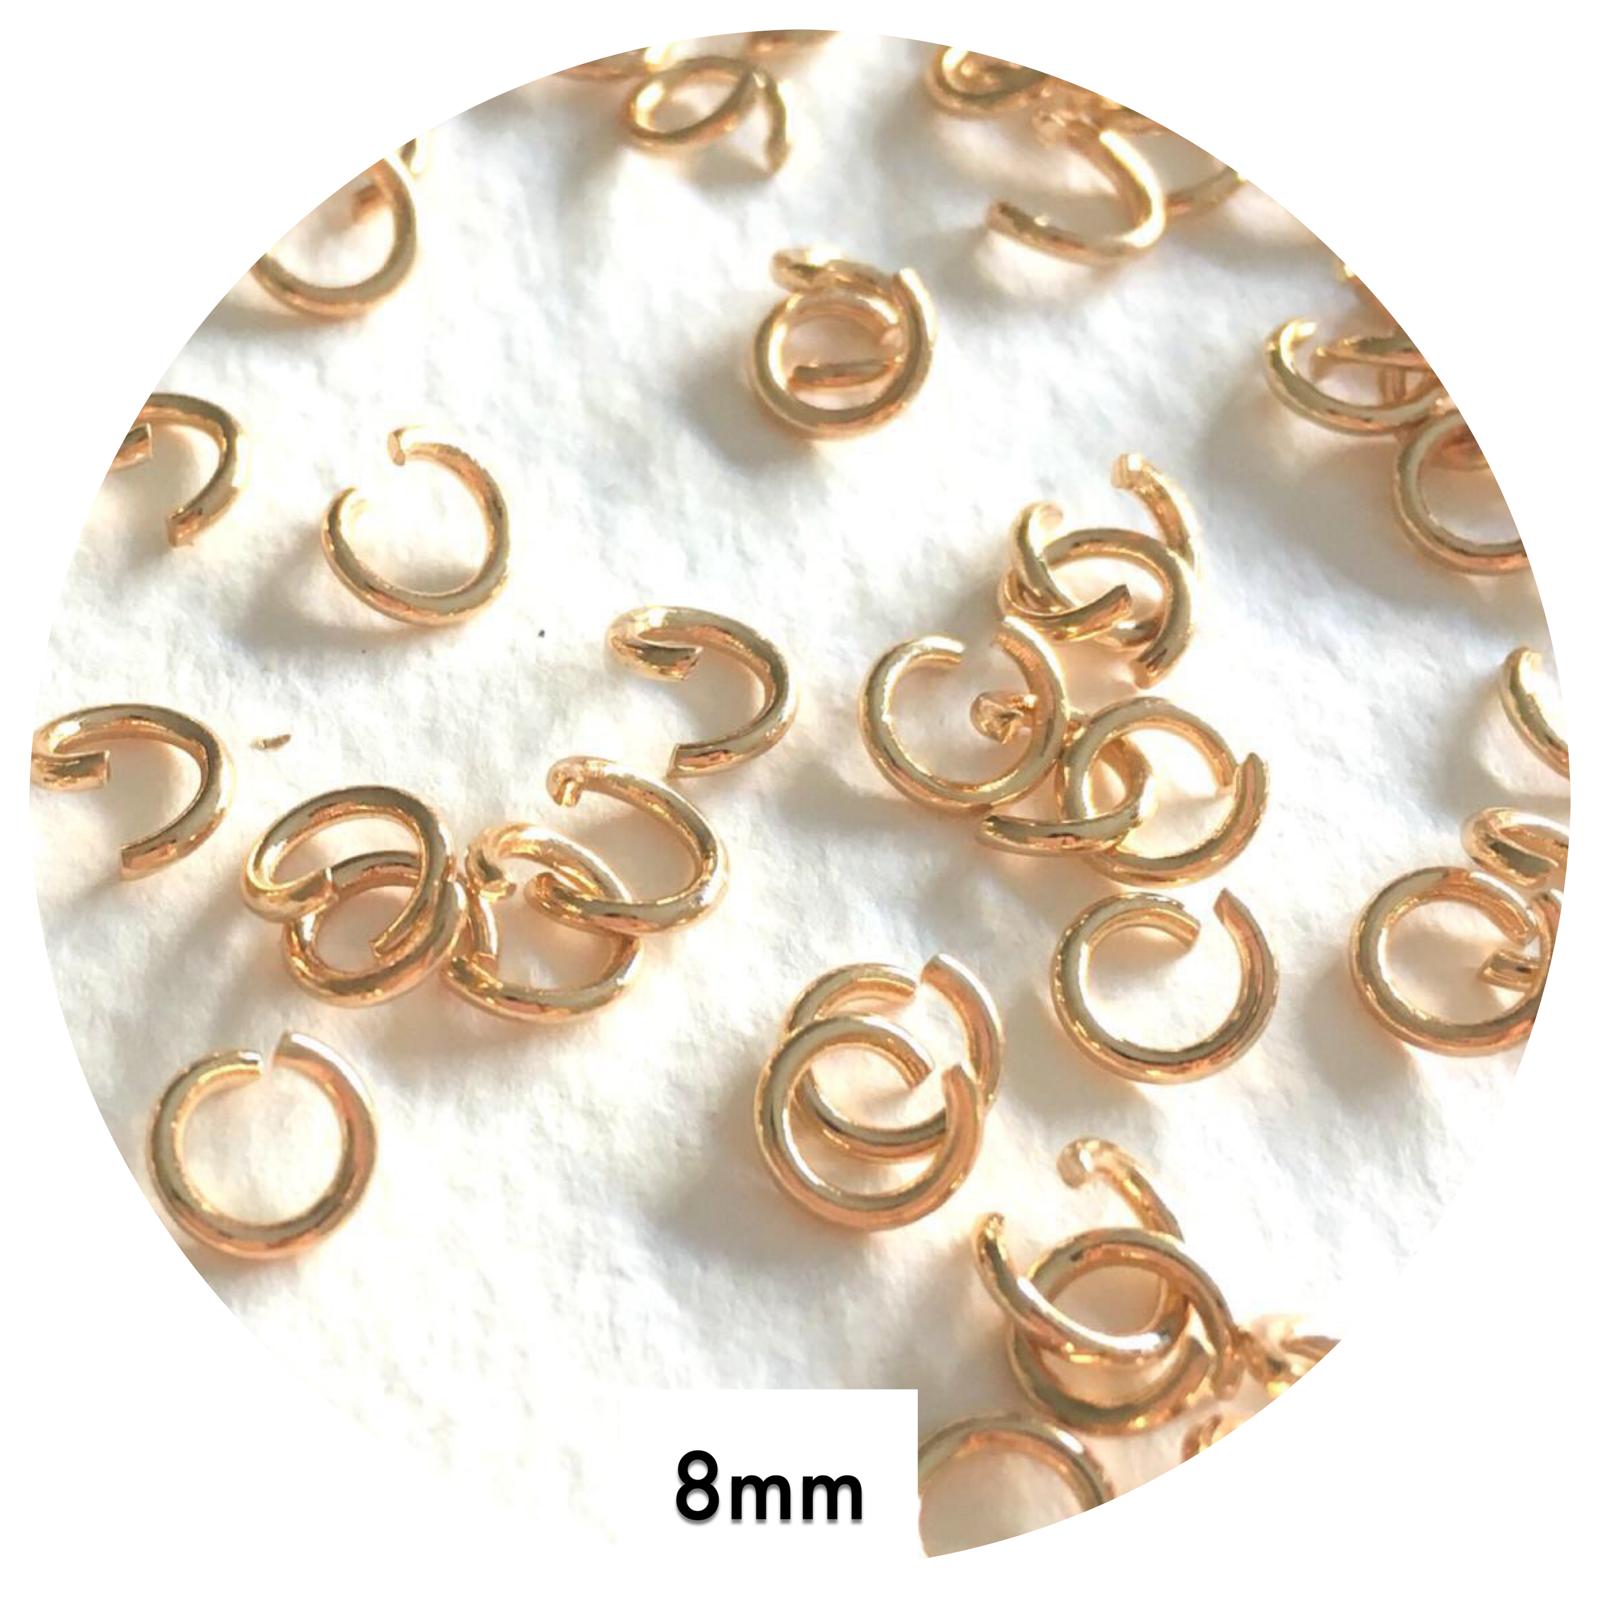 8mm Jump Rings - Gold Stainless Steel - 40 pcs